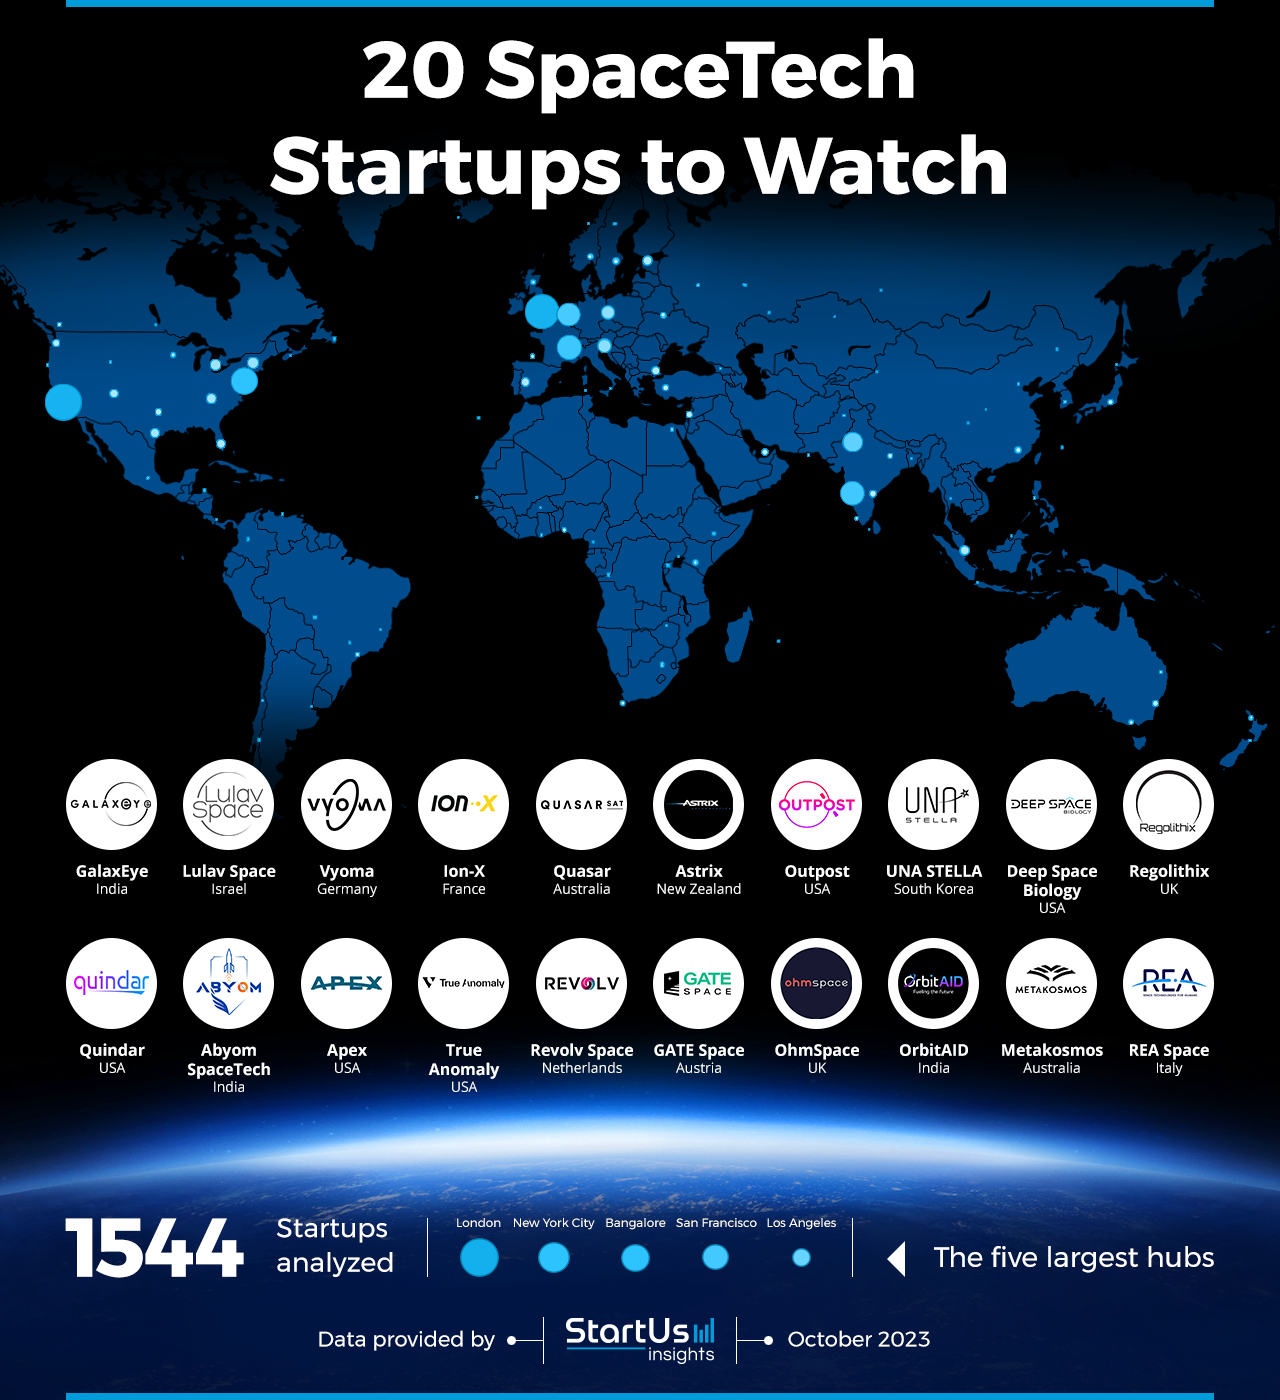 SpaceTech-Startups-to-Watch-Heat-Map-StartUs-Insights-noresize